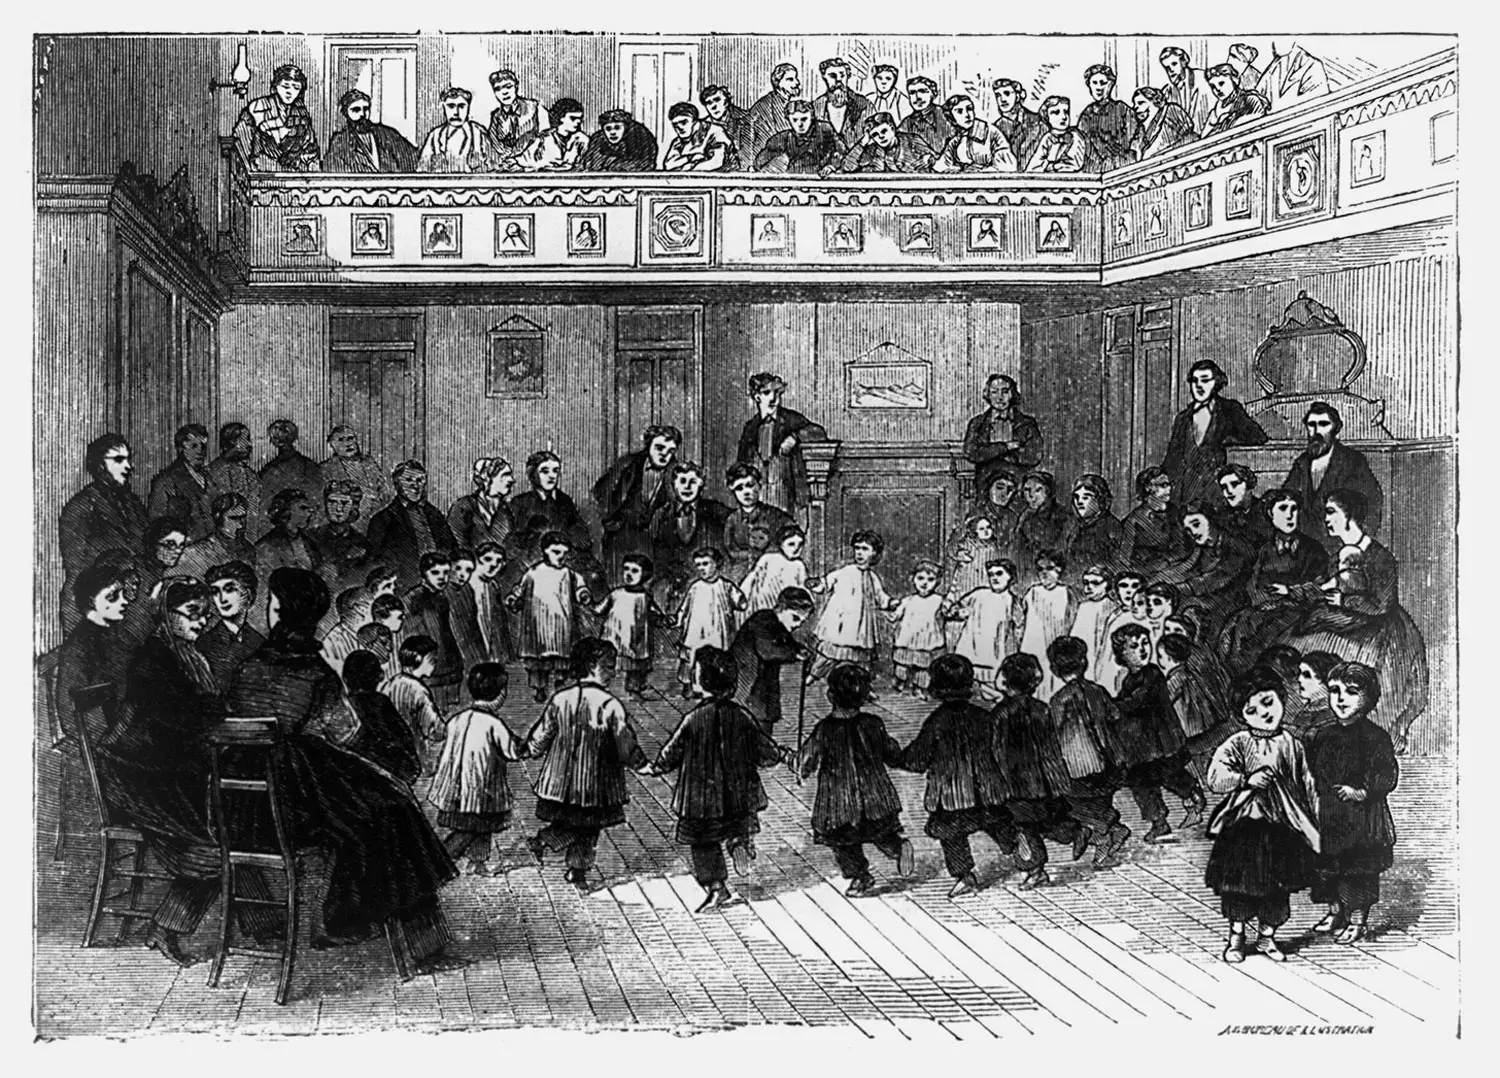 A group of children dance in a circle while adults around them, and in the balcony above, look on.